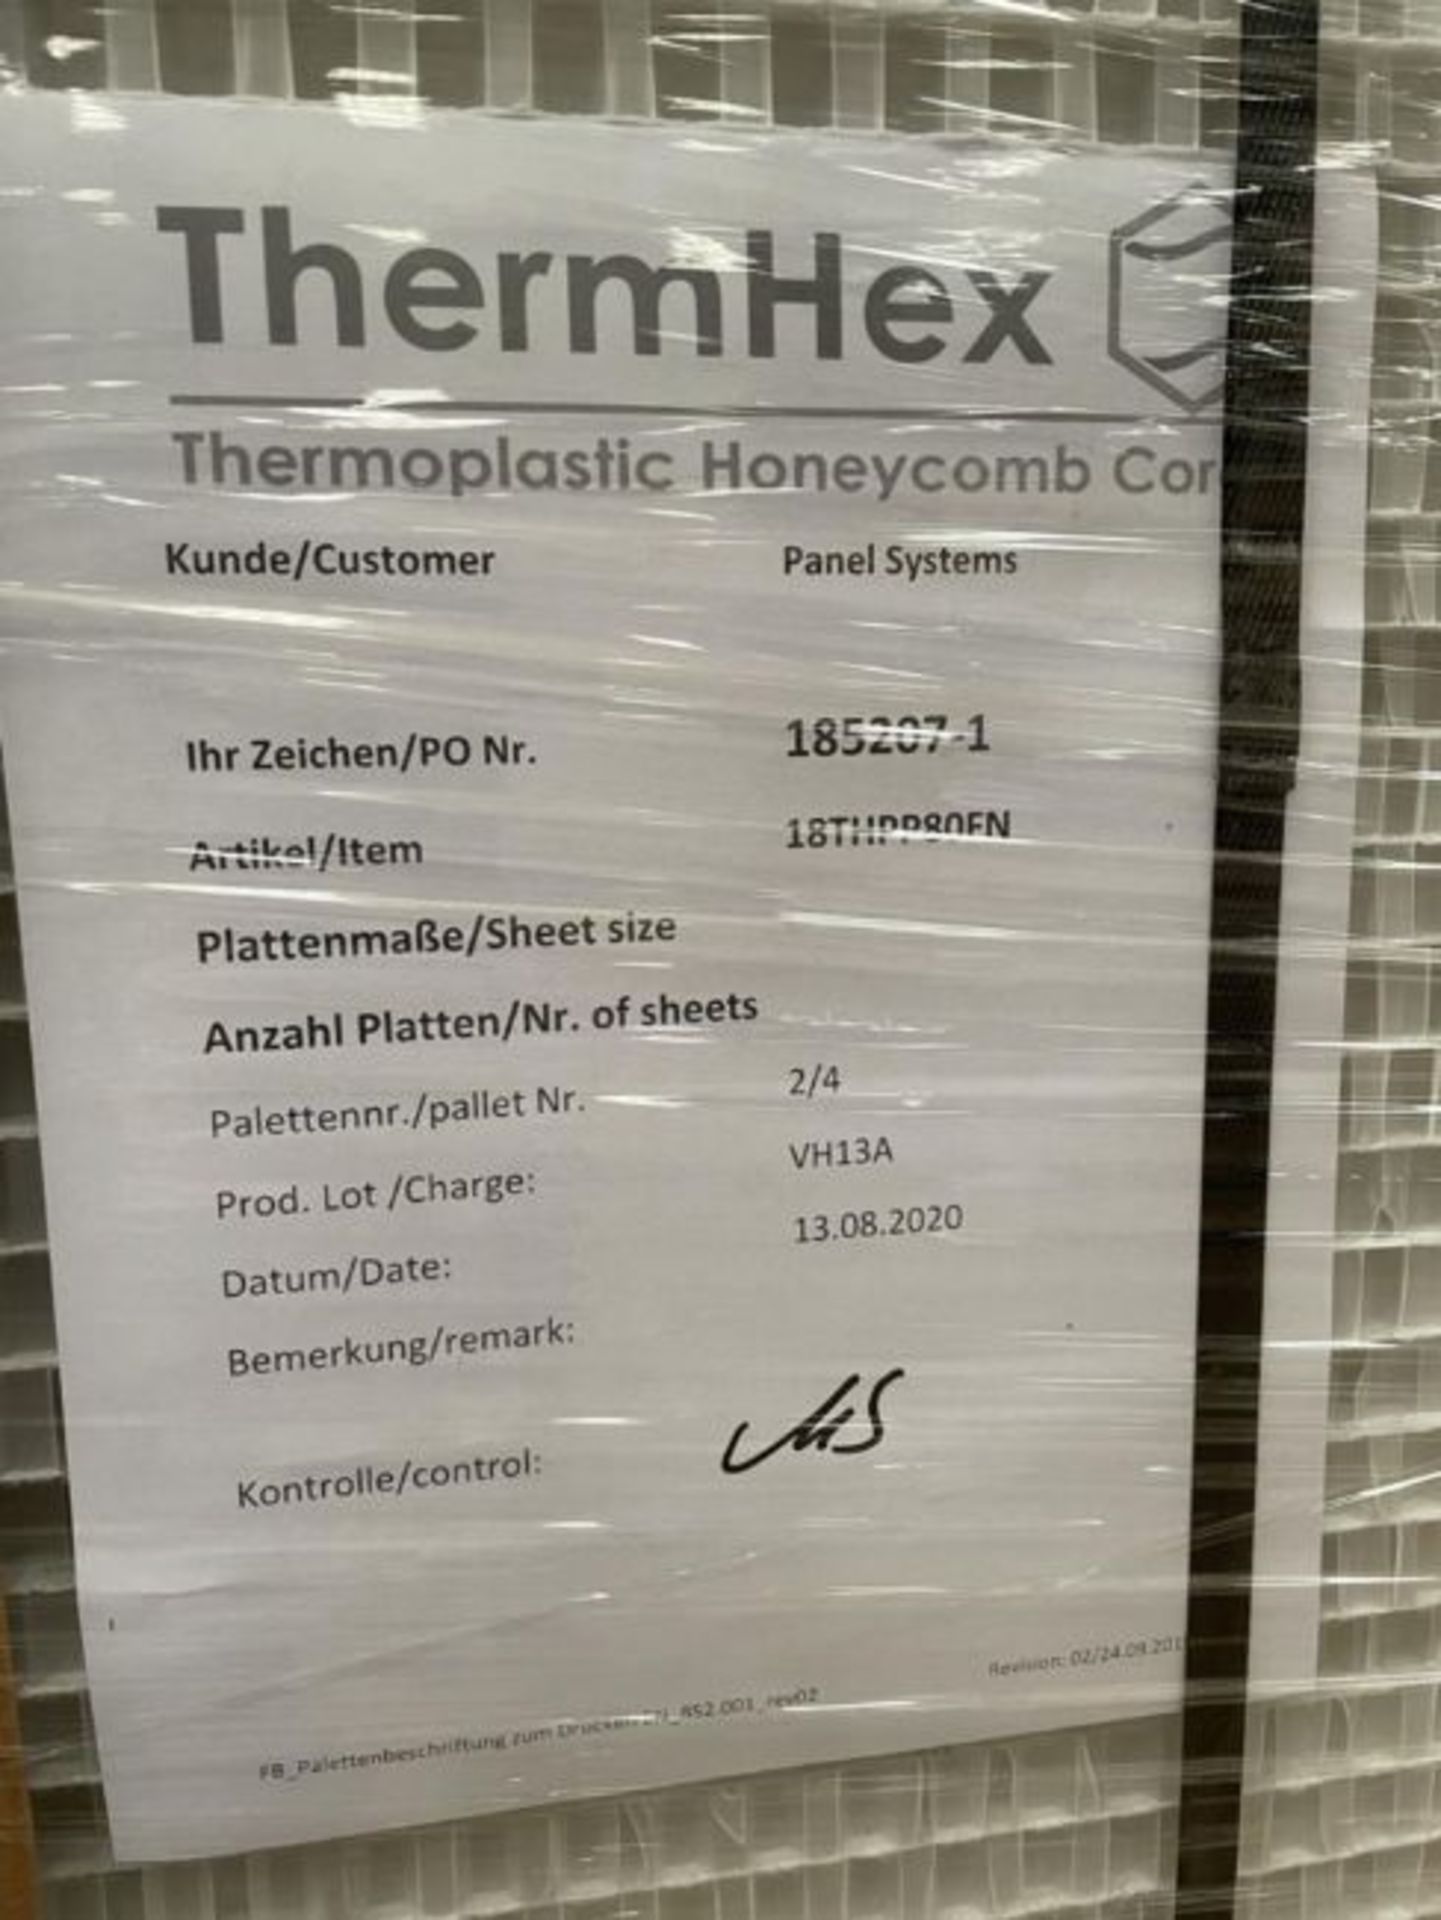 100 x ThermHex Thermoplastic Honeycomb Core Panels - Size: 3558 x 1215 x 20mm - New Stock - - Image 3 of 7